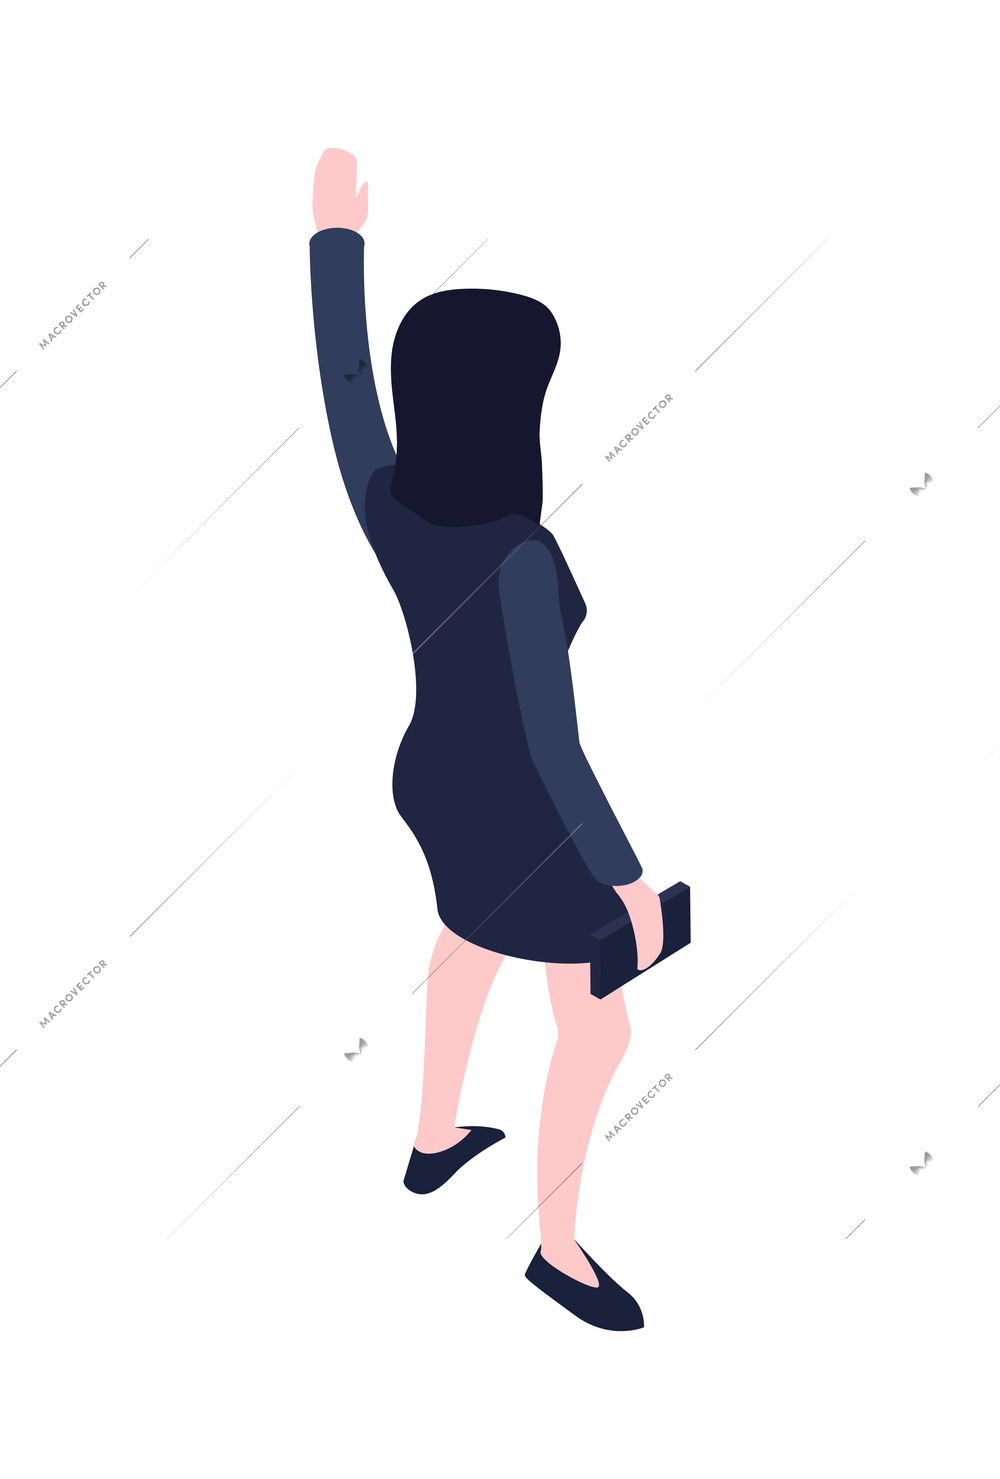 Back view of isometric woman trying to stop taxi 3d vector illustration